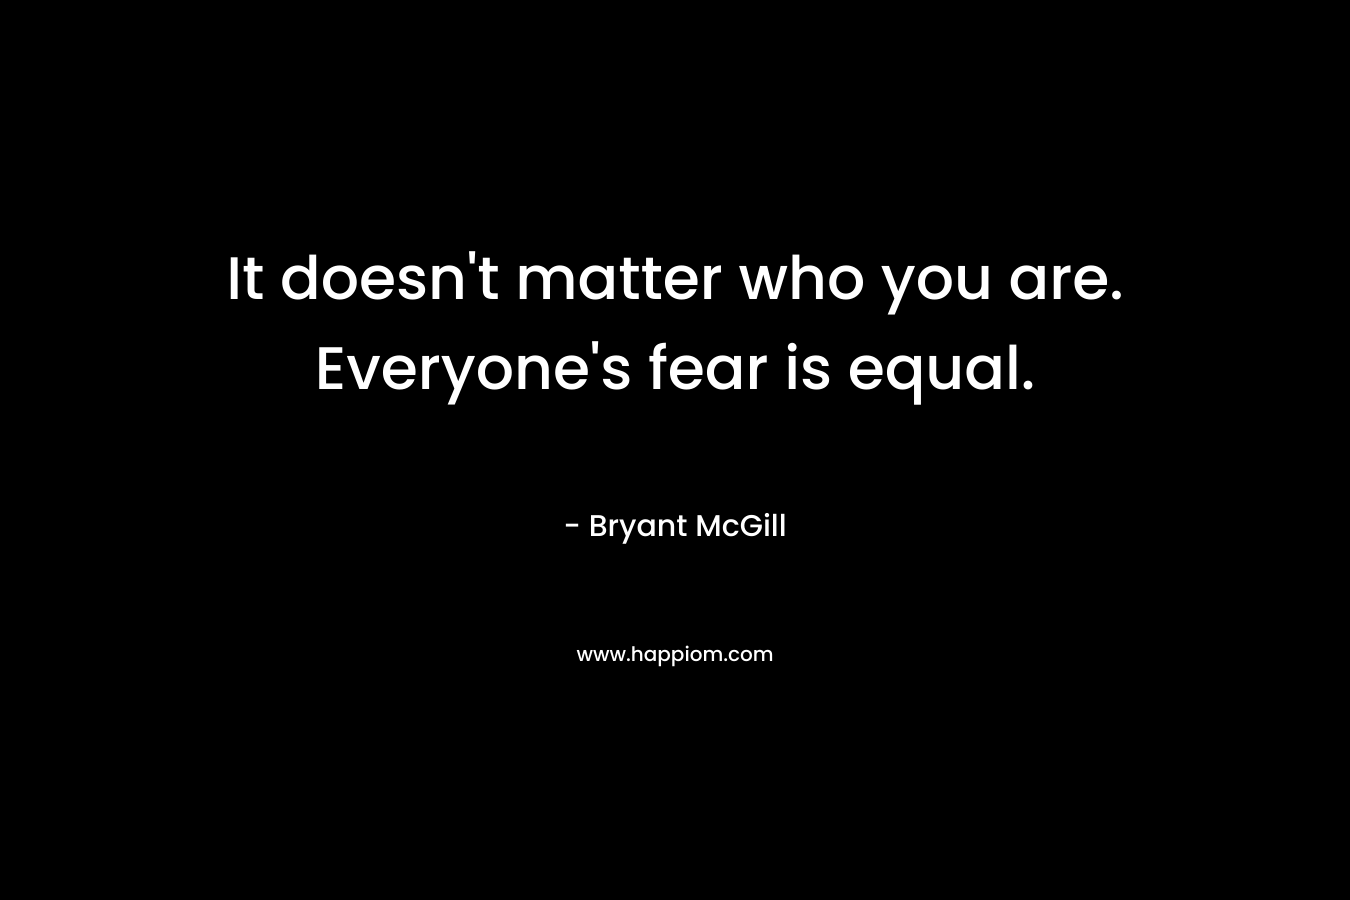 It doesn’t matter who you are. Everyone’s fear is equal. – Bryant McGill